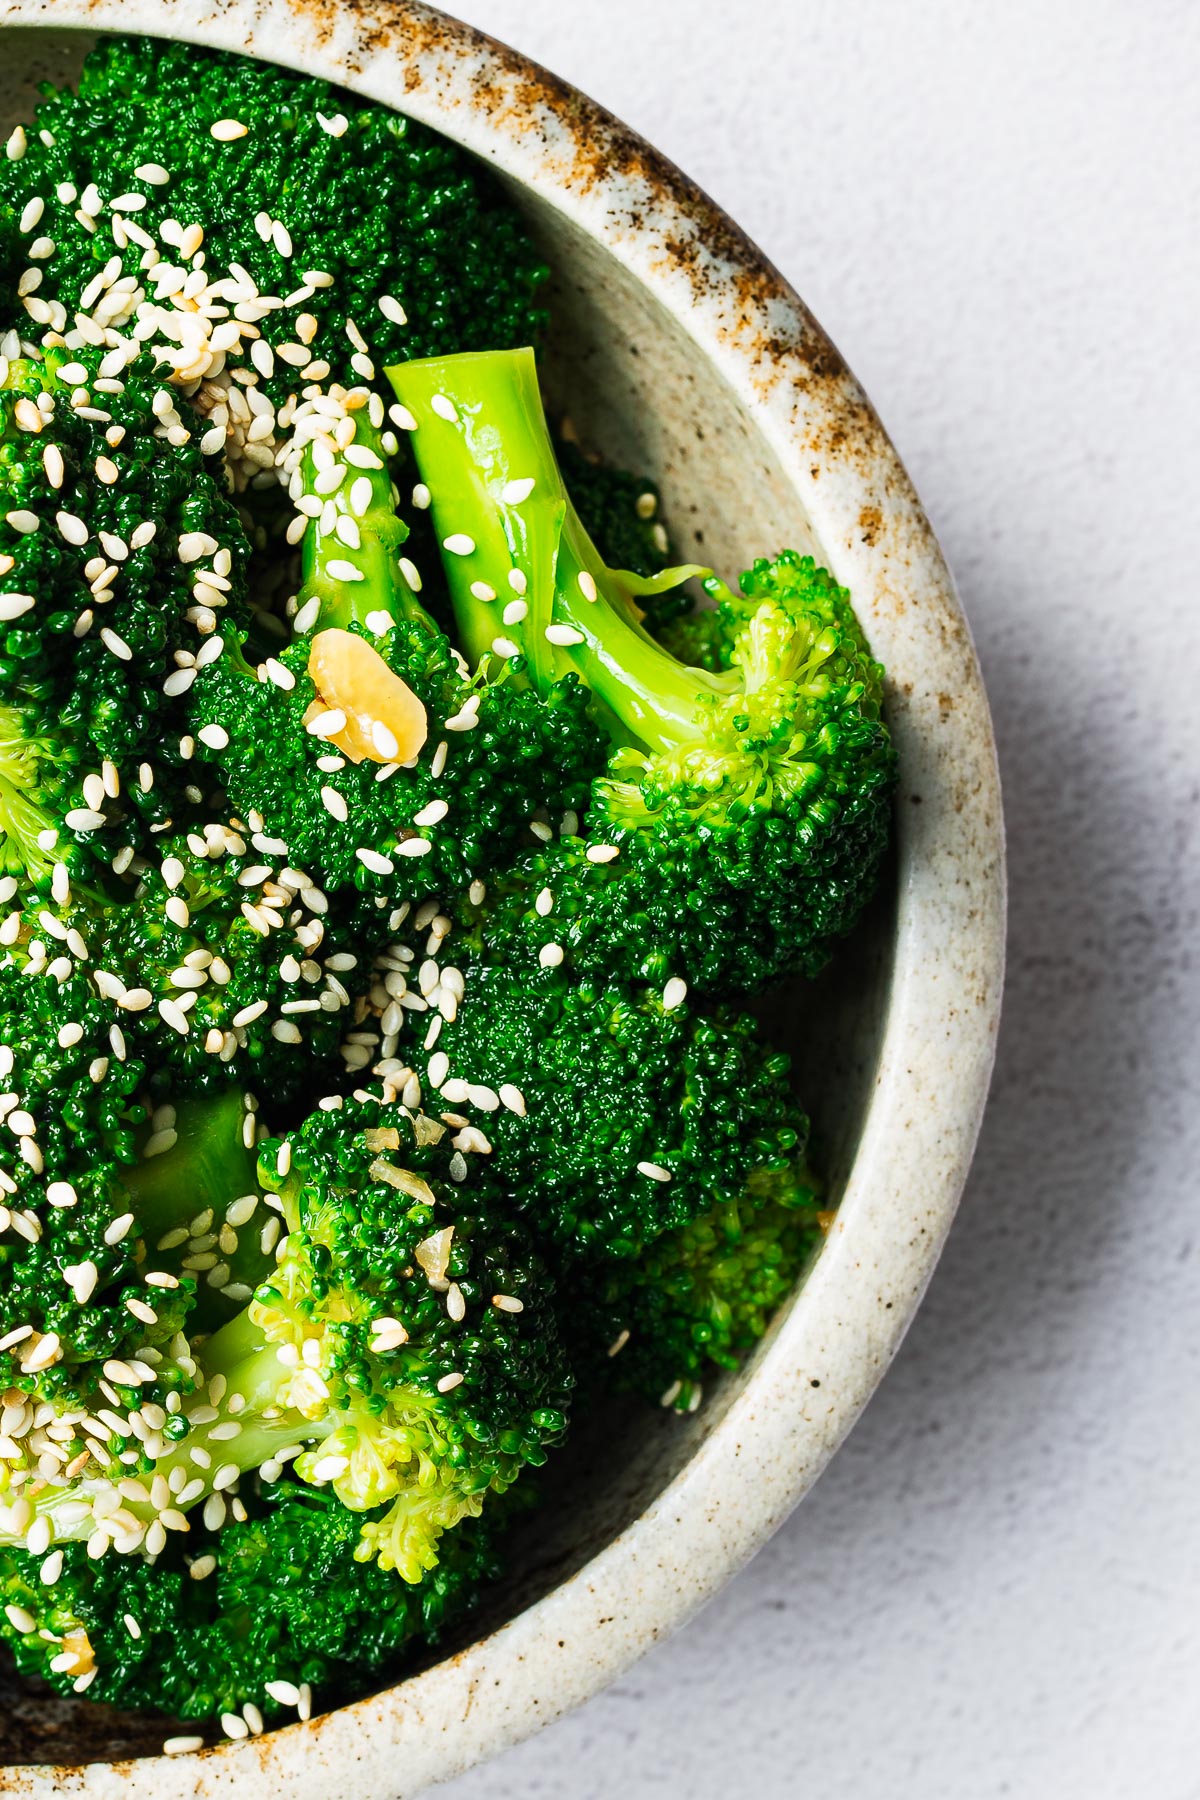 Korean broccoli salad close-up viewed from above.